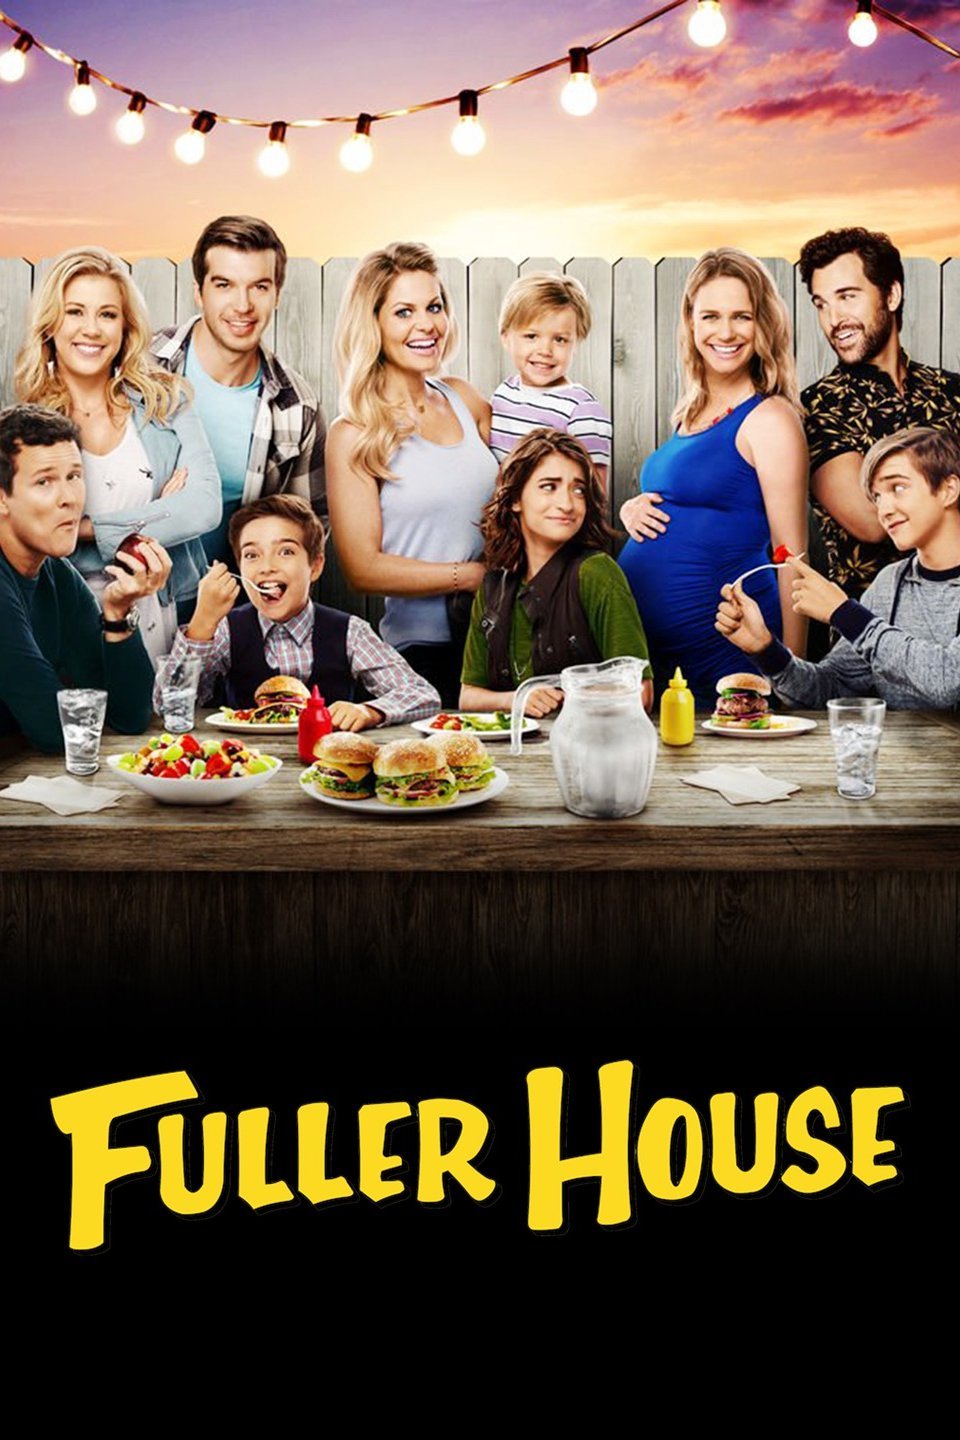 when does fuller house season 5 come out on dvd